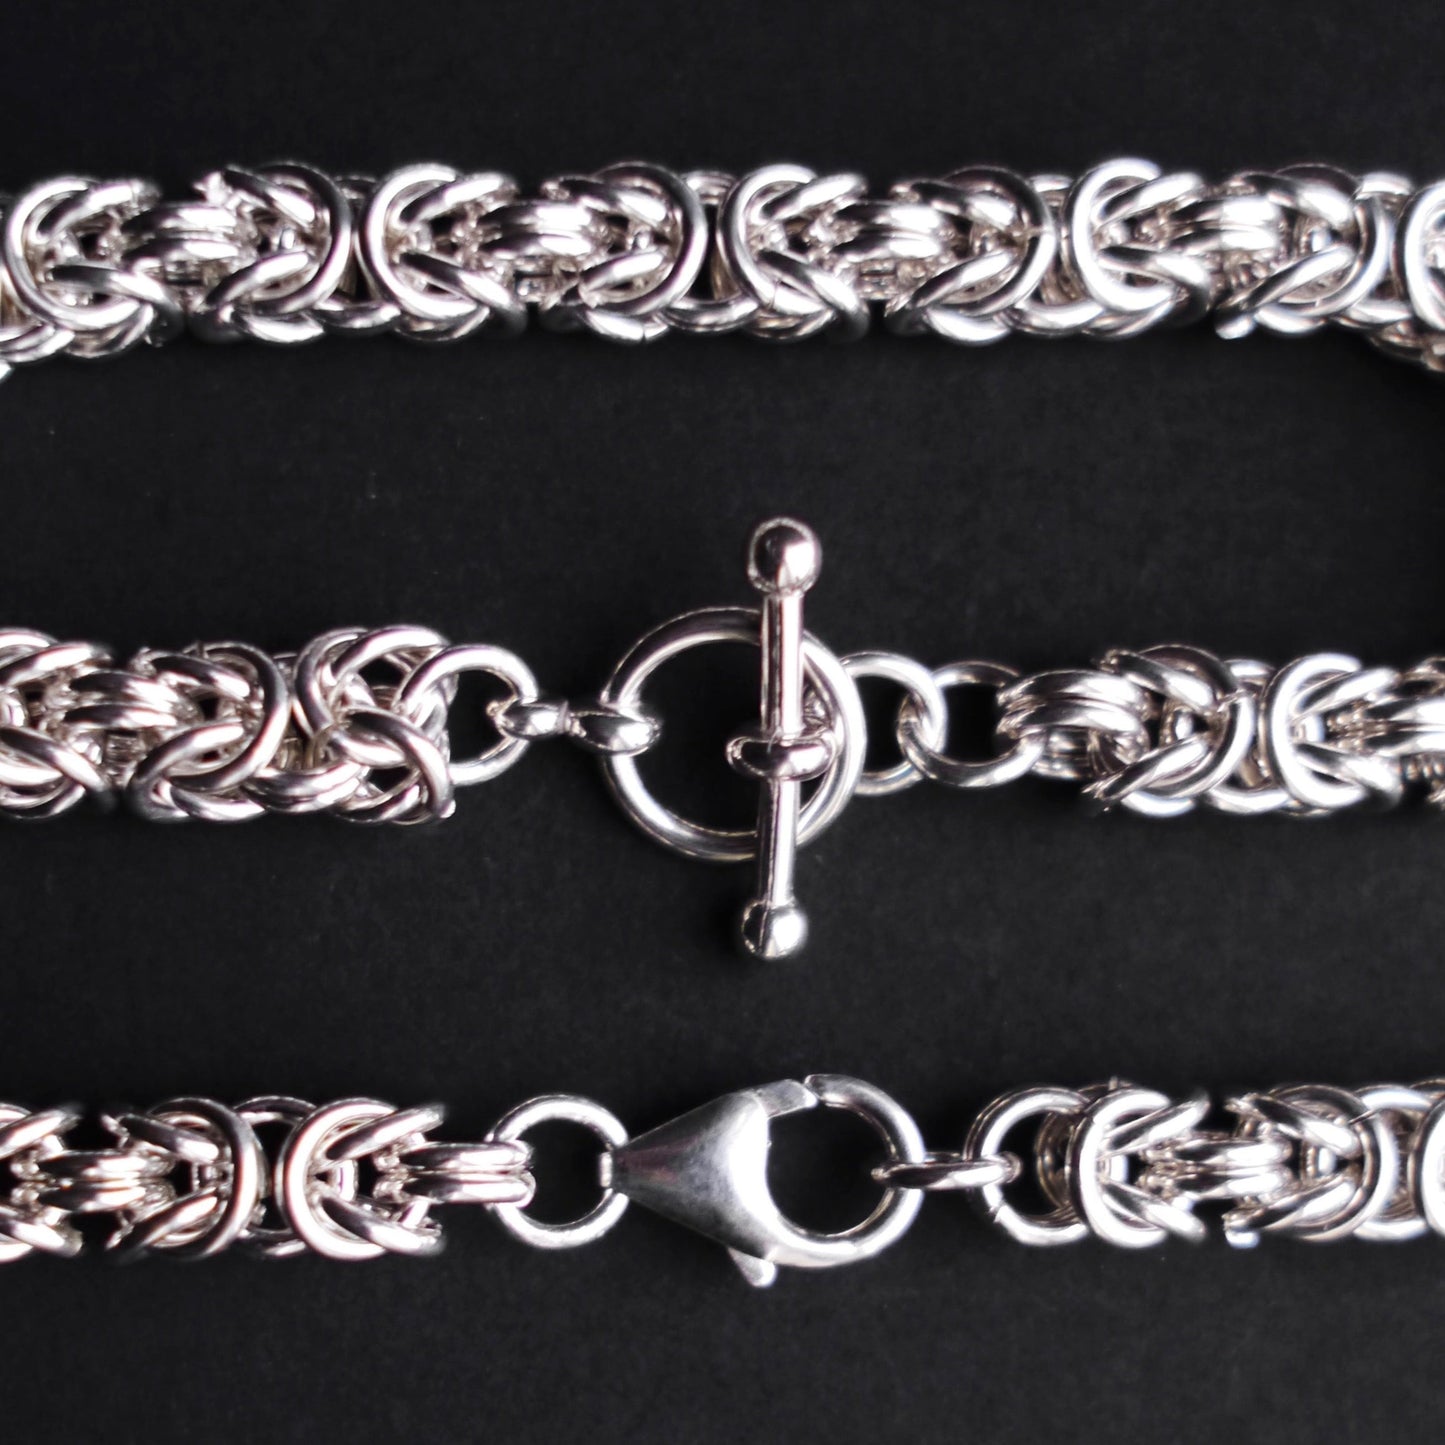 7mm Byzantine Chainmaille Bracelet in Sterling Silver